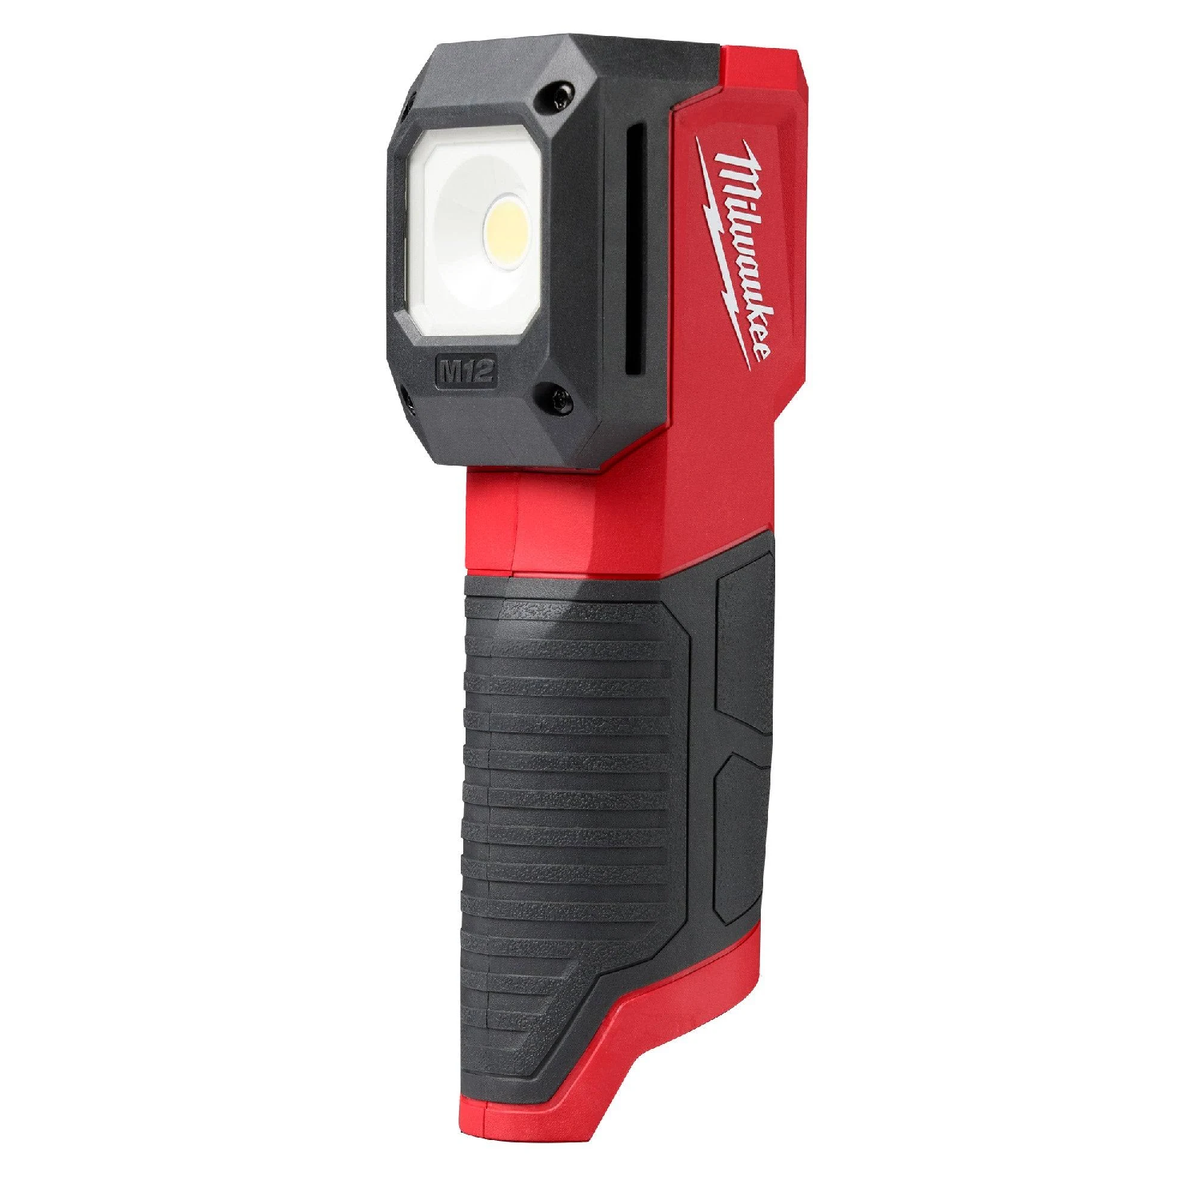 Milwaukee 2127-20 M12 Paint and Detailing Color Match Light — 1SourceTool